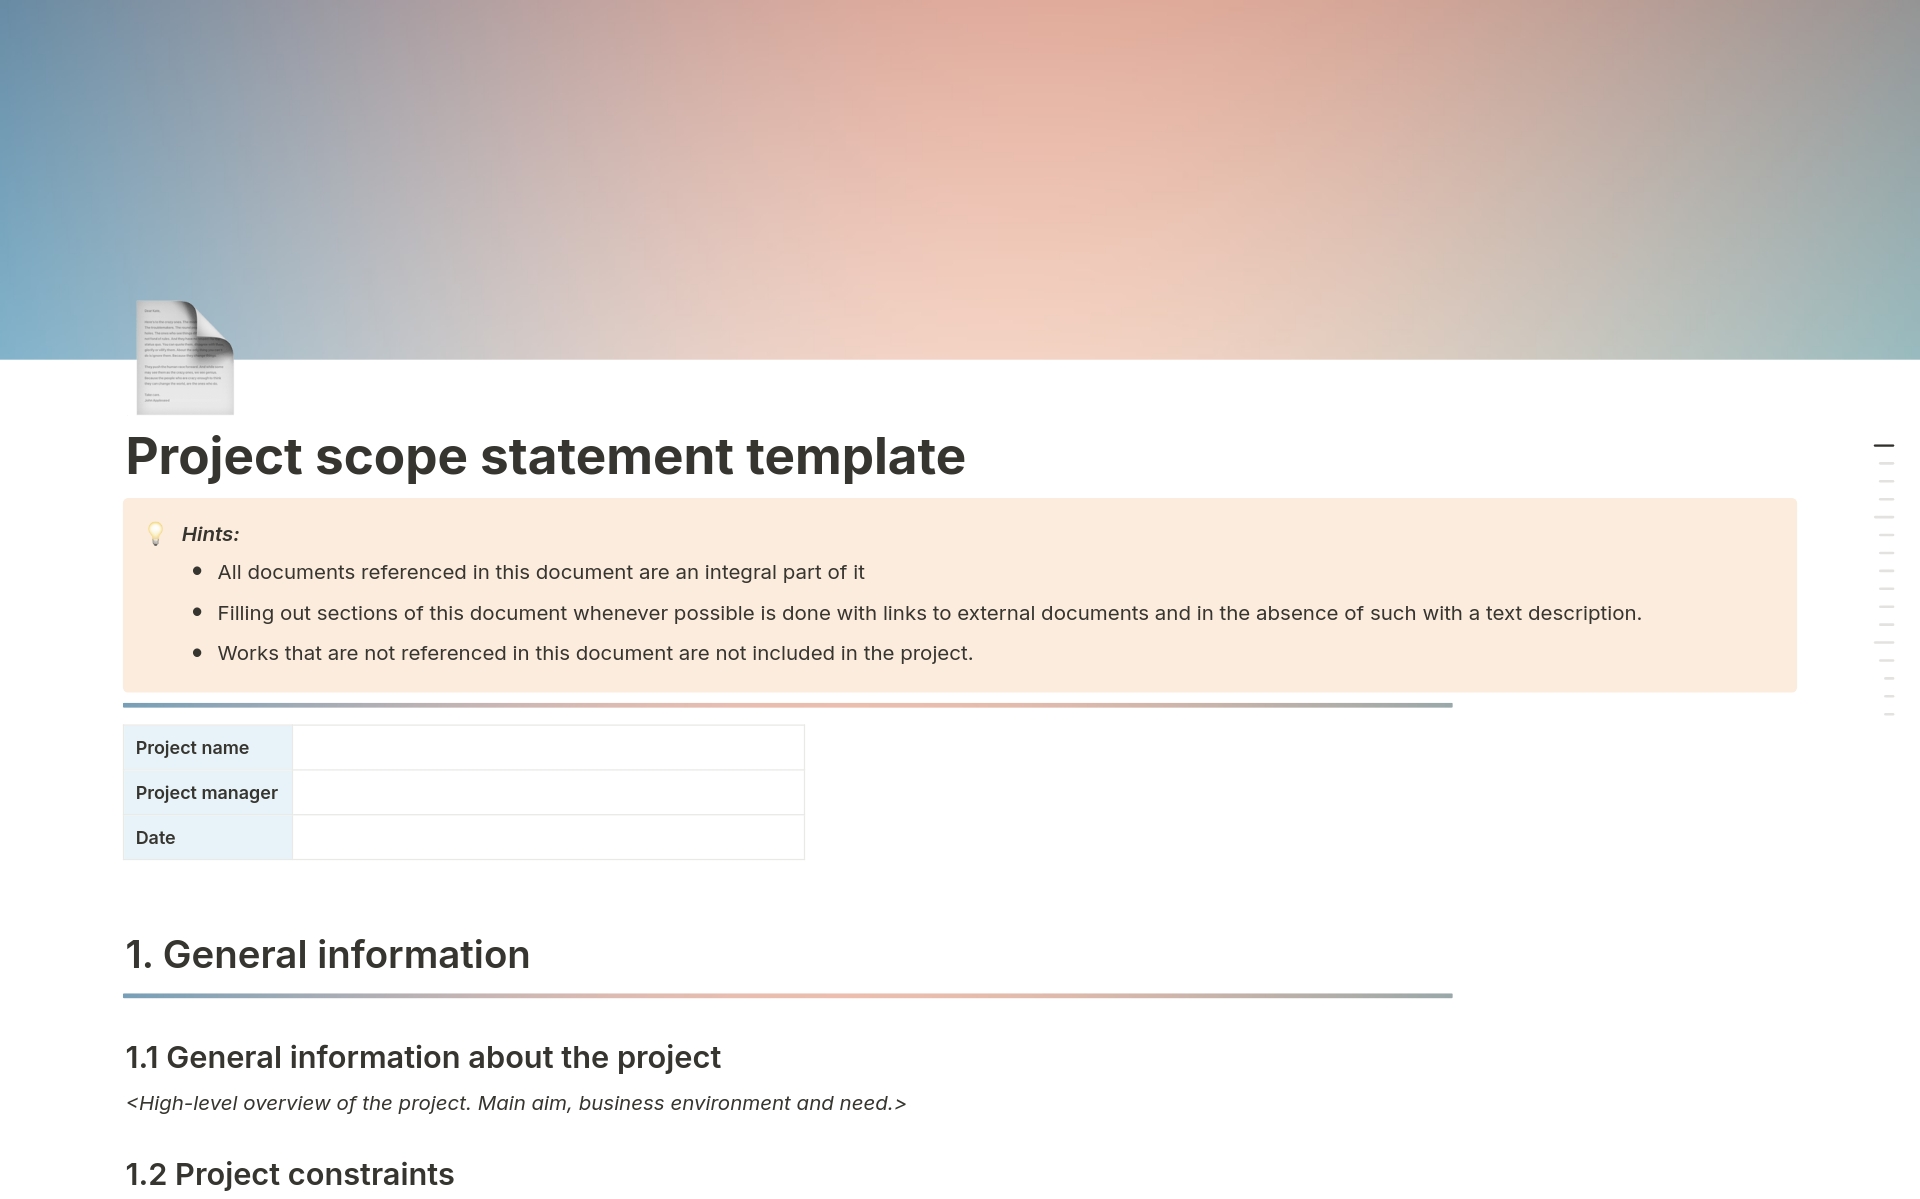 You'll get a ready template and table of contents for creating a scope statement document. It's standardized and easy to use.